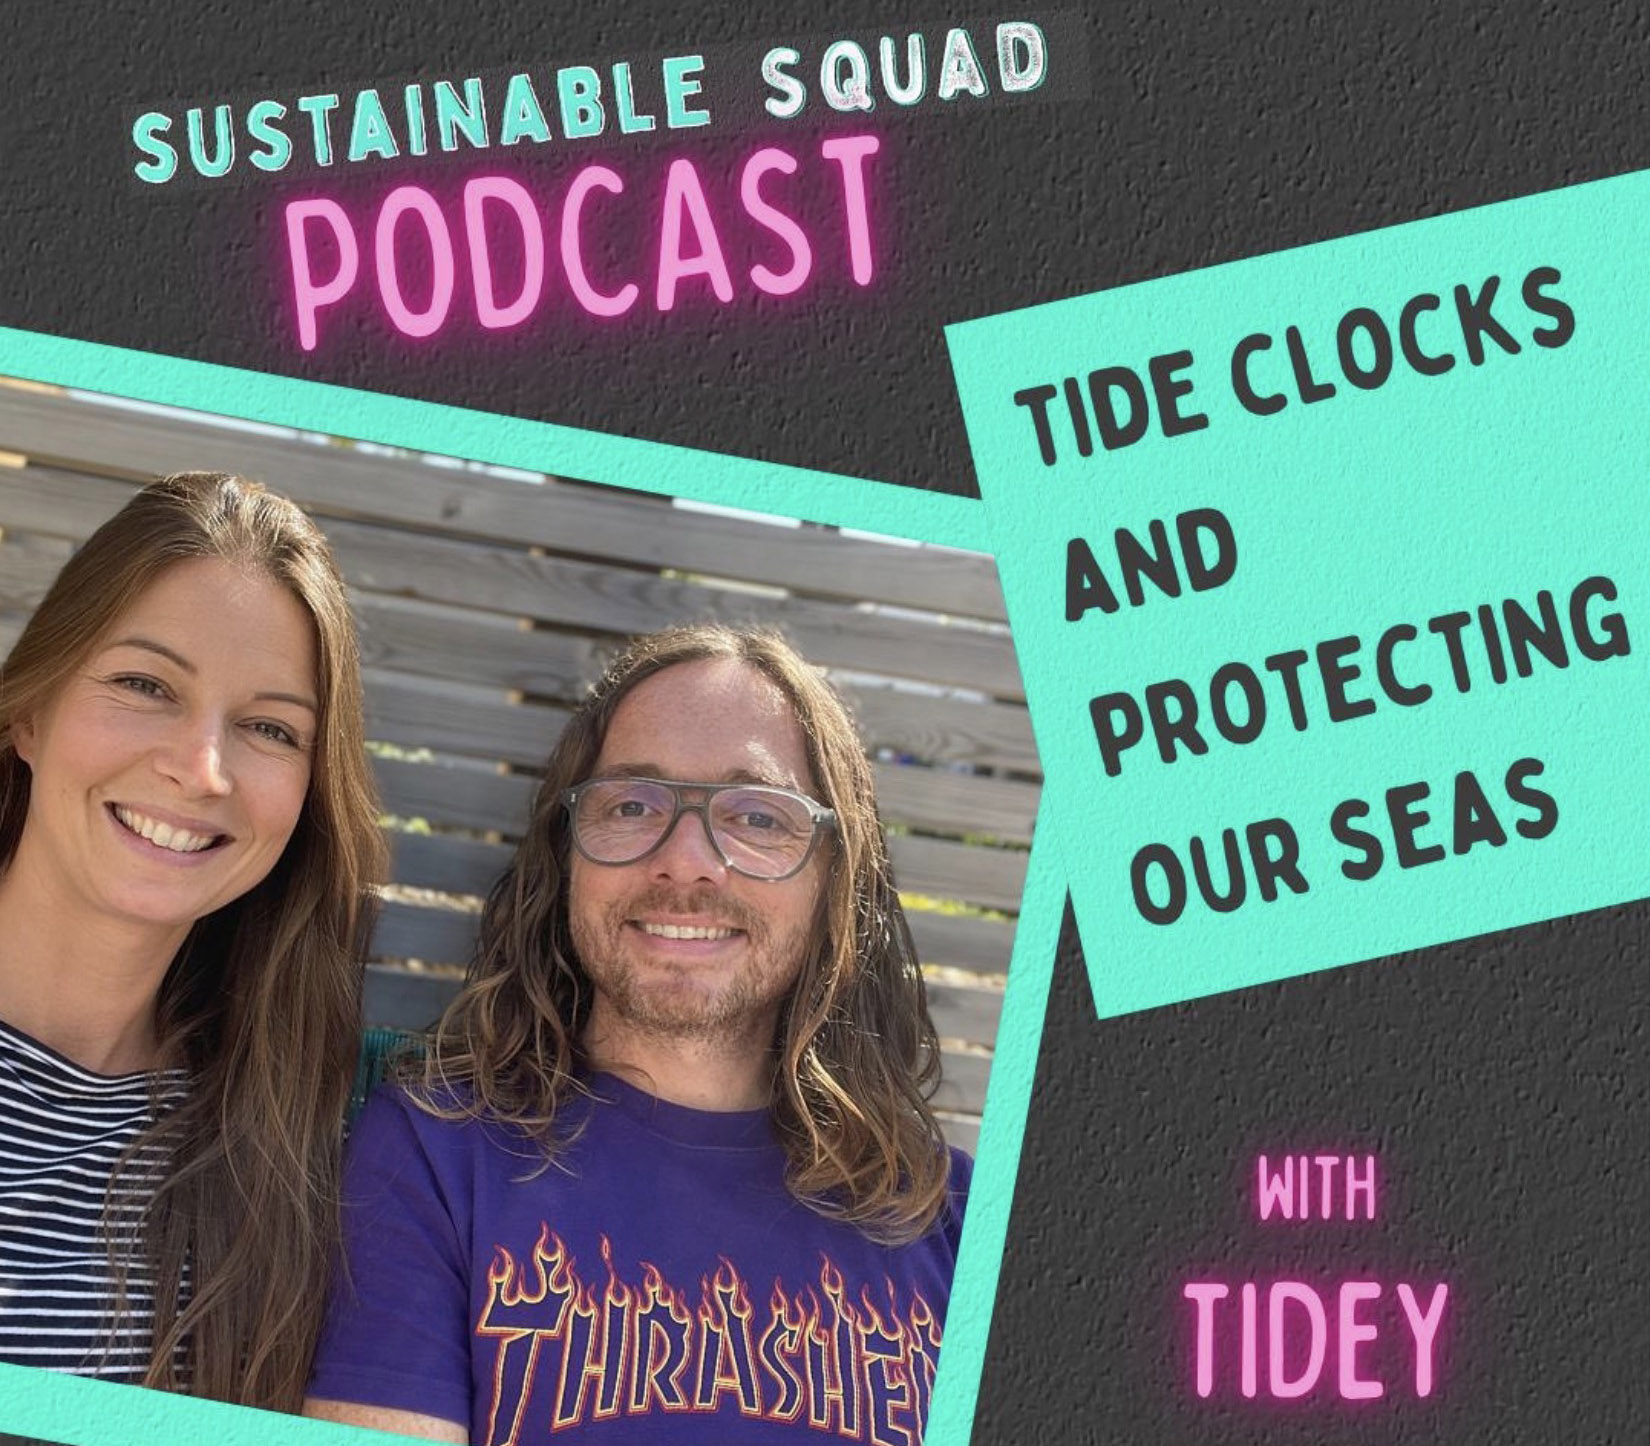 Tide clocks and a love of the sea: an awesome chat with Sustainable Squad